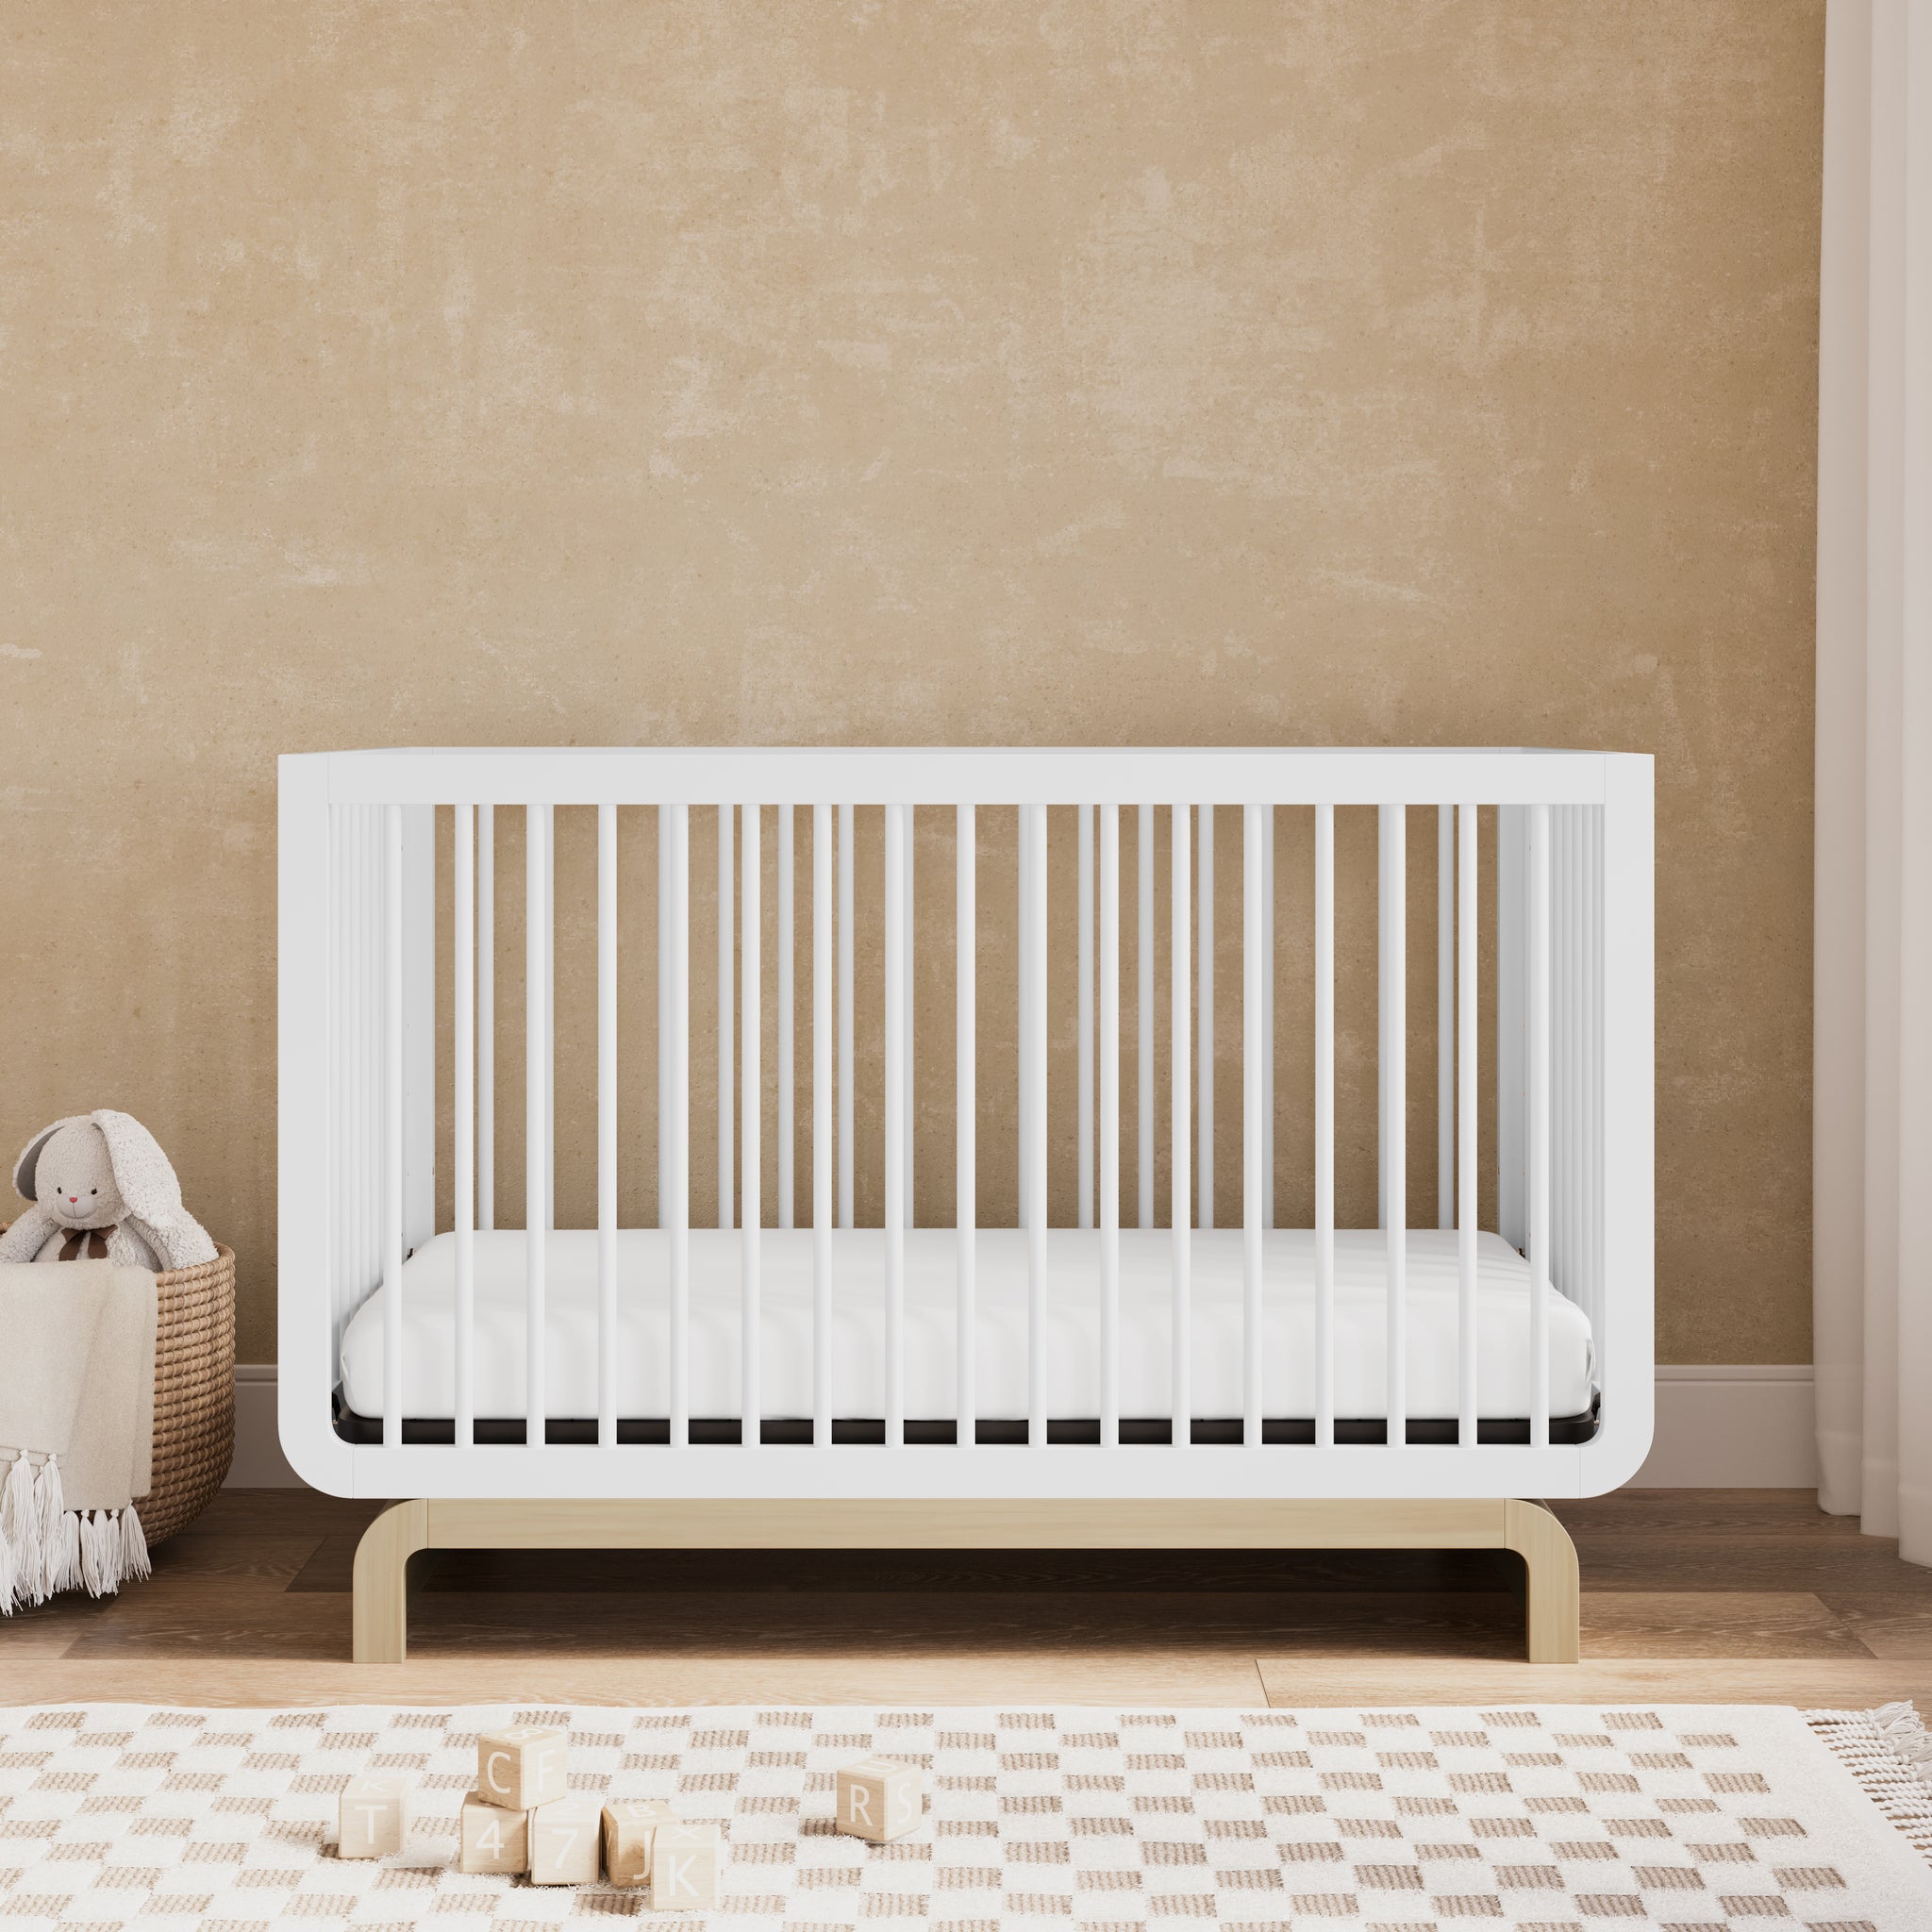 Convertible crib in white with driftwood colorway in a nursery